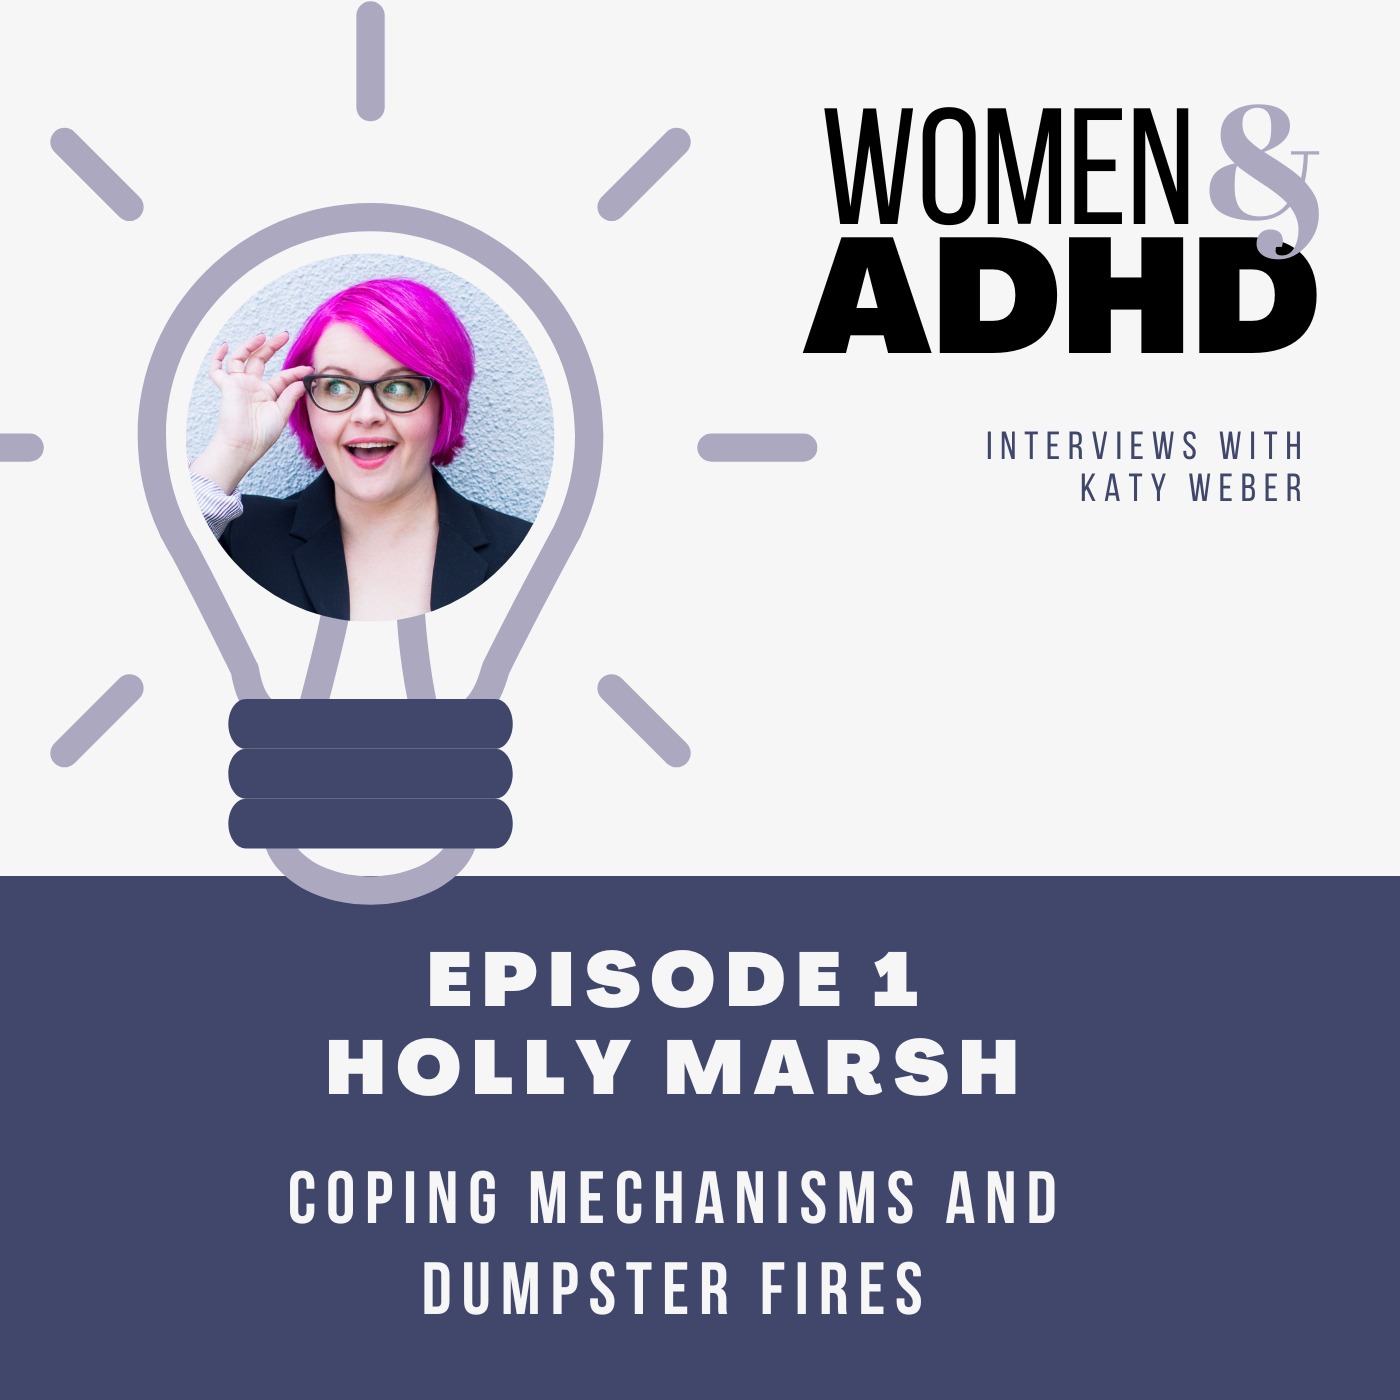 Holly Marsh: Coping mechanisms and dumpster fires